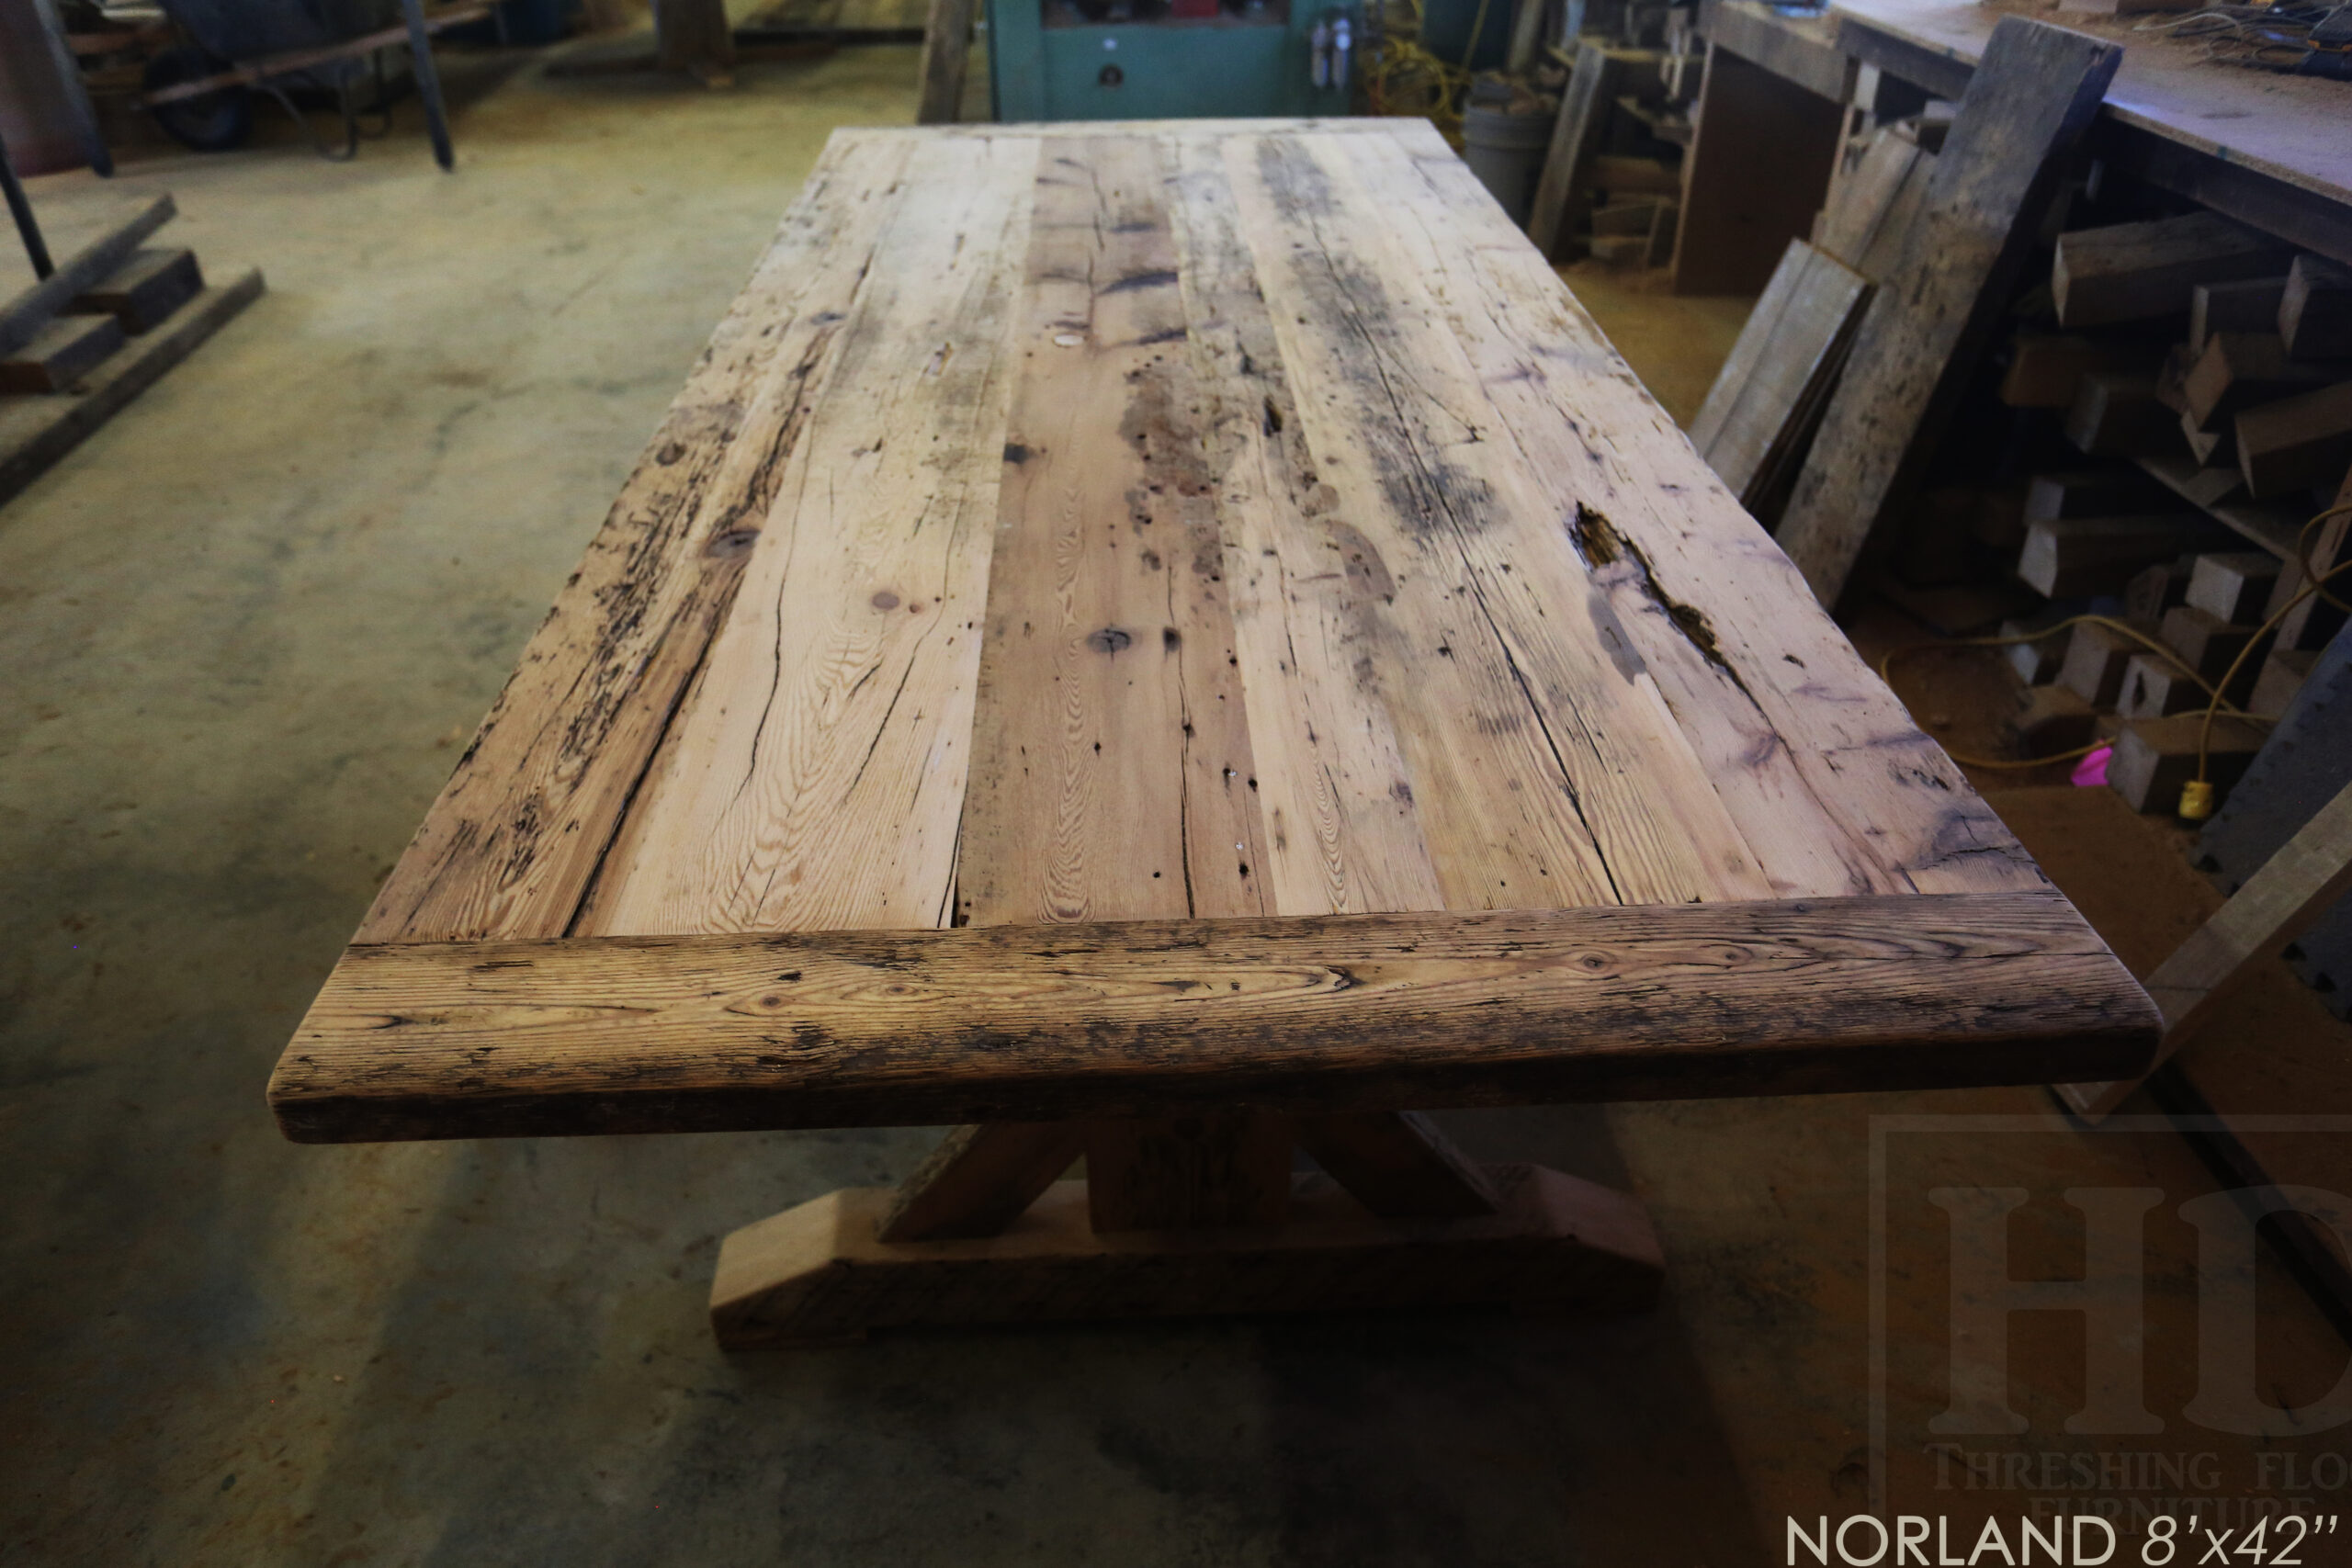 8' Ontario Barnwood Table we made for a Burlington, Ontario home - 42" wide - Sawbuck base - Original edges & distressing maintained - Old growth Hemlock Threshing Floor 2" Top - Premium epoxy + satin polyurethane finish - 8' [matching] bench - 6 Plank Back Chairs / Wormy Maple www.table.ca